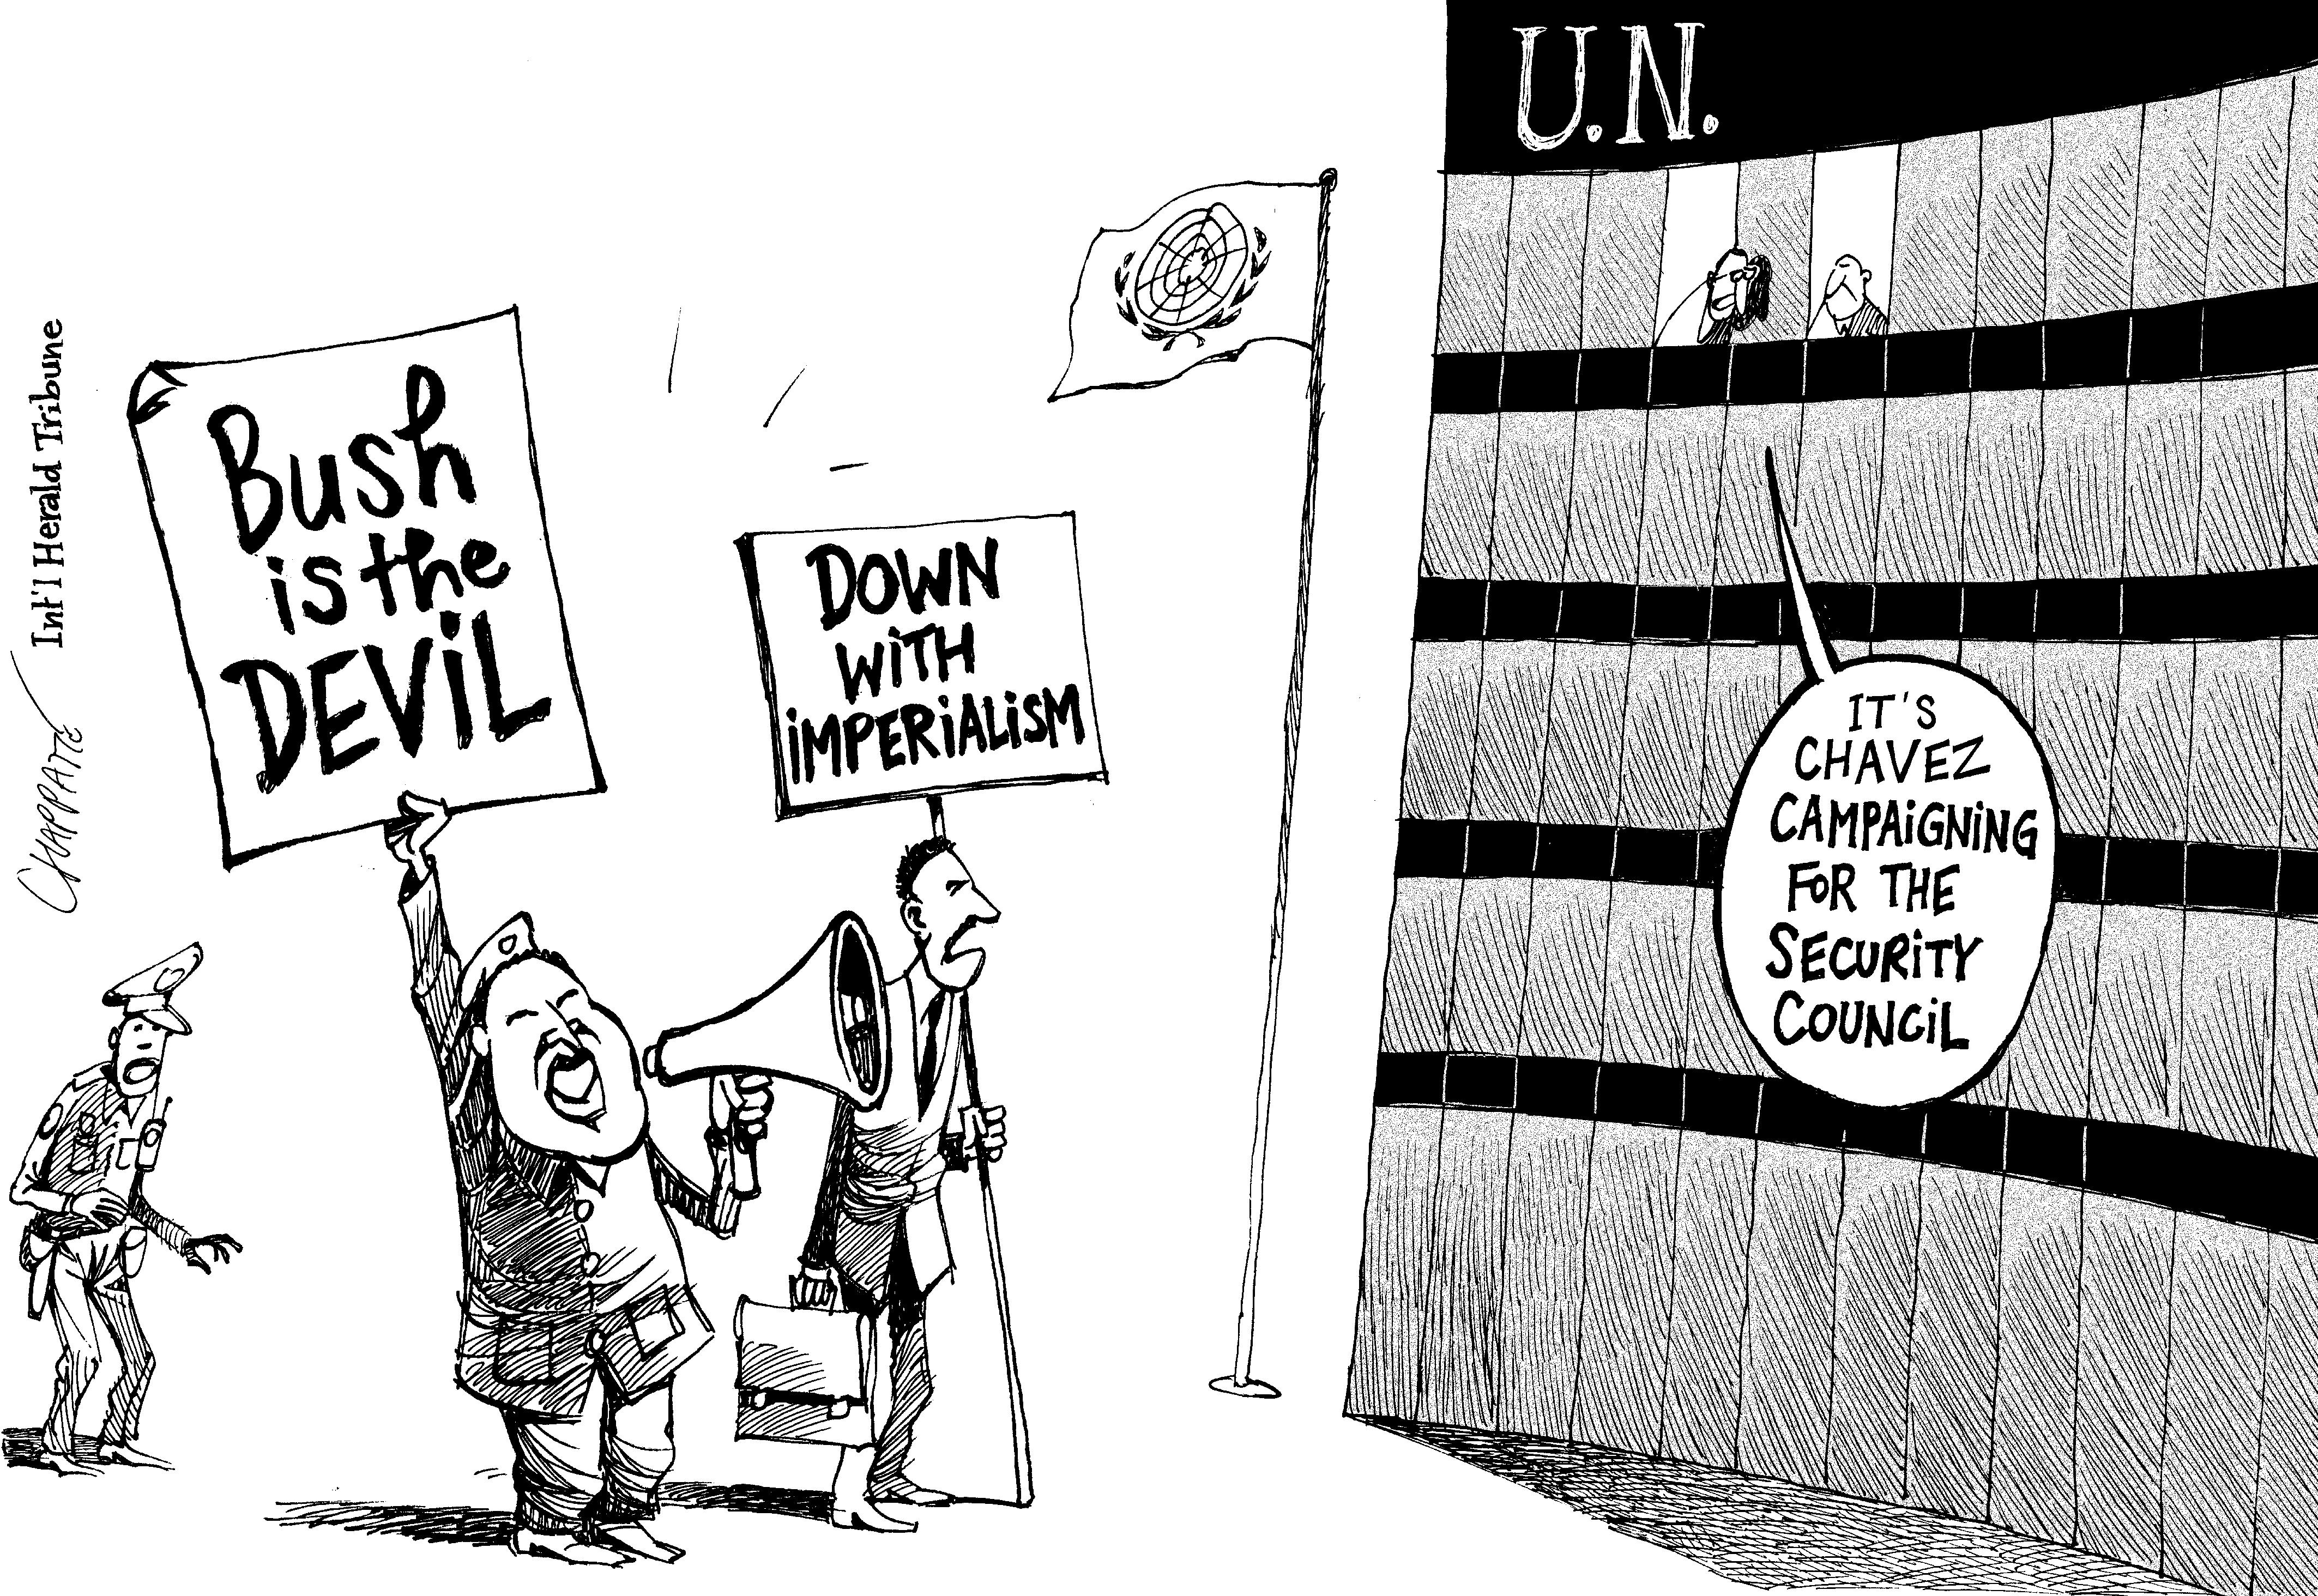 Fight at the UN